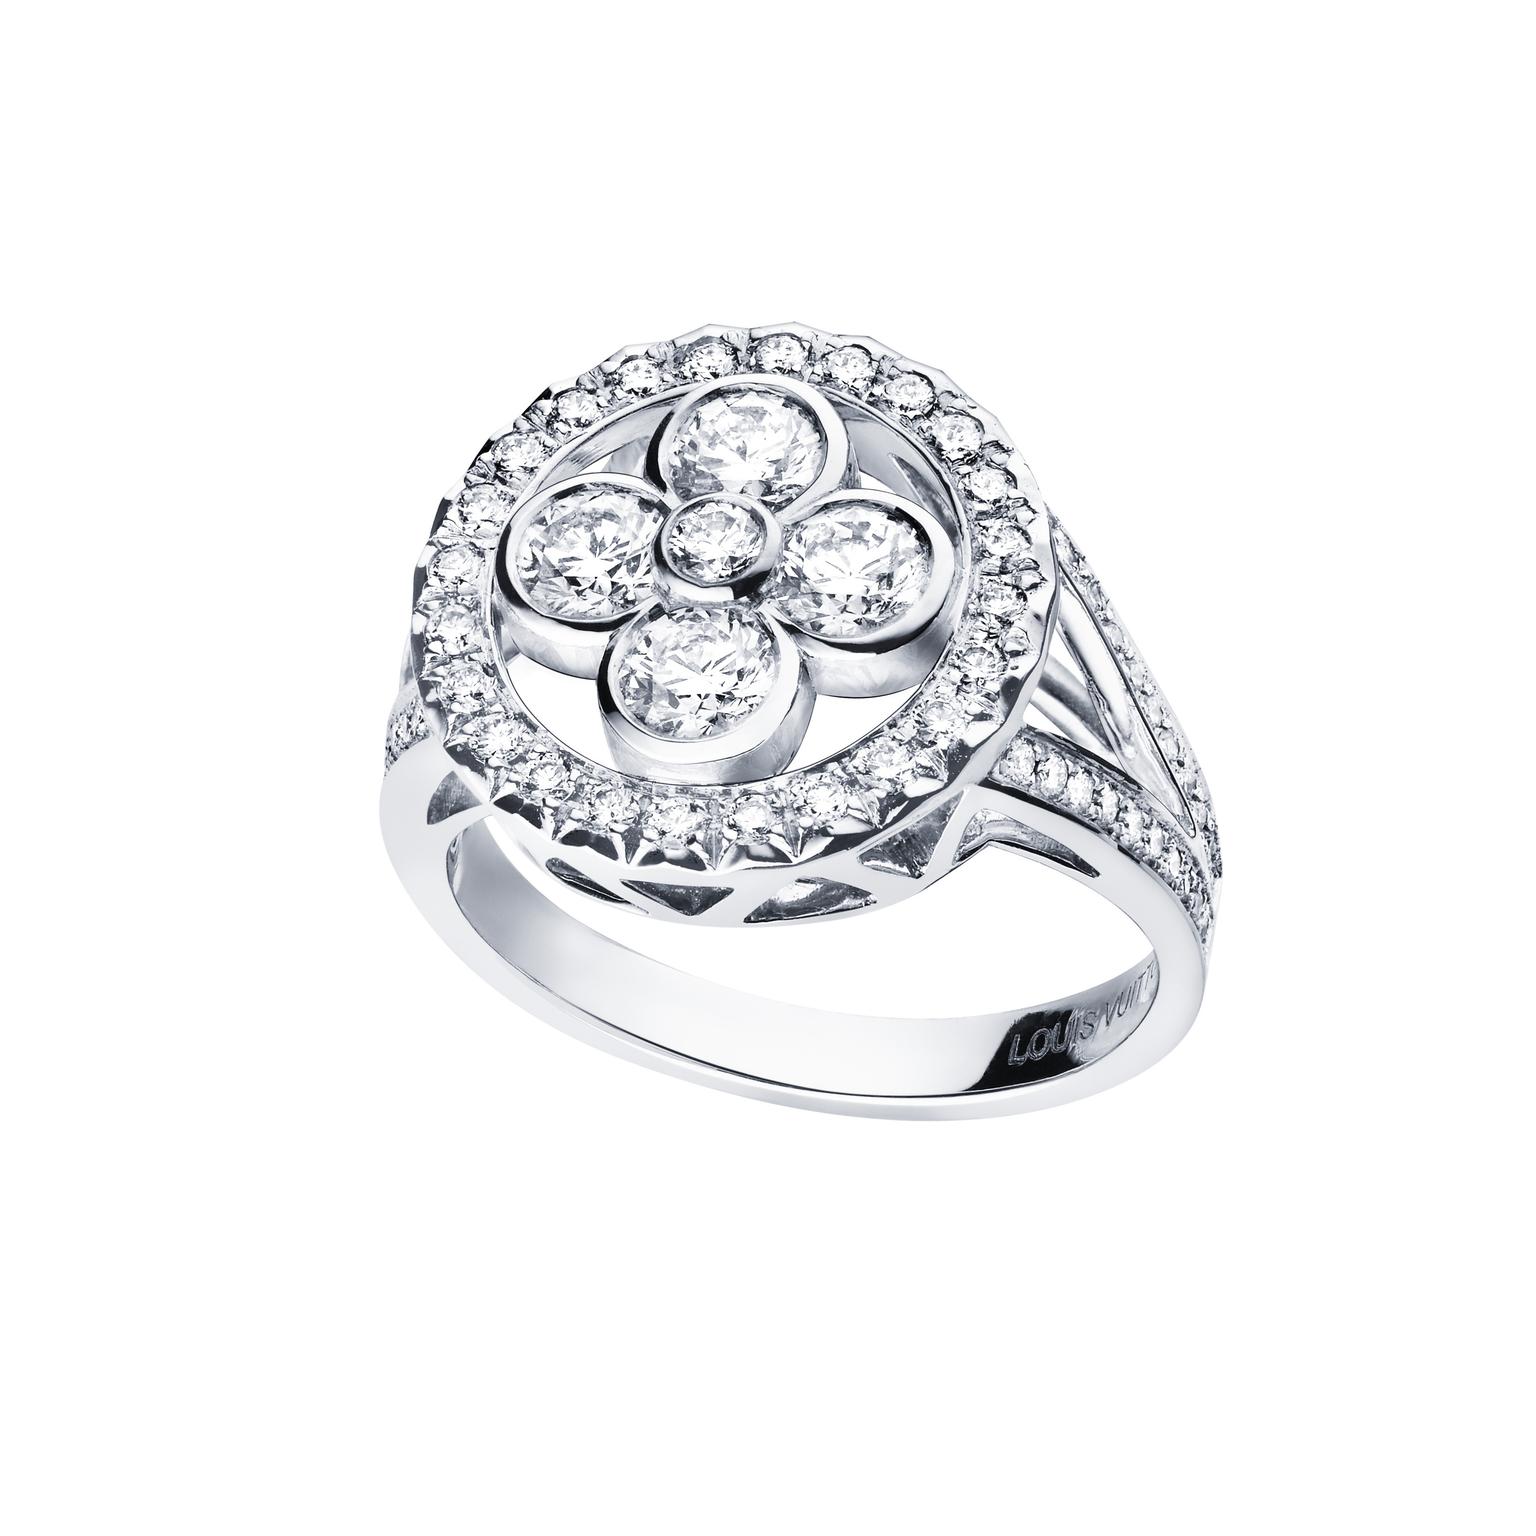 Louis Vuitton Monogram Forever ring in white gold and diamonds, from the new Monogram Sun collection, features the Maison's iconic round-petal quatrefoil flower.